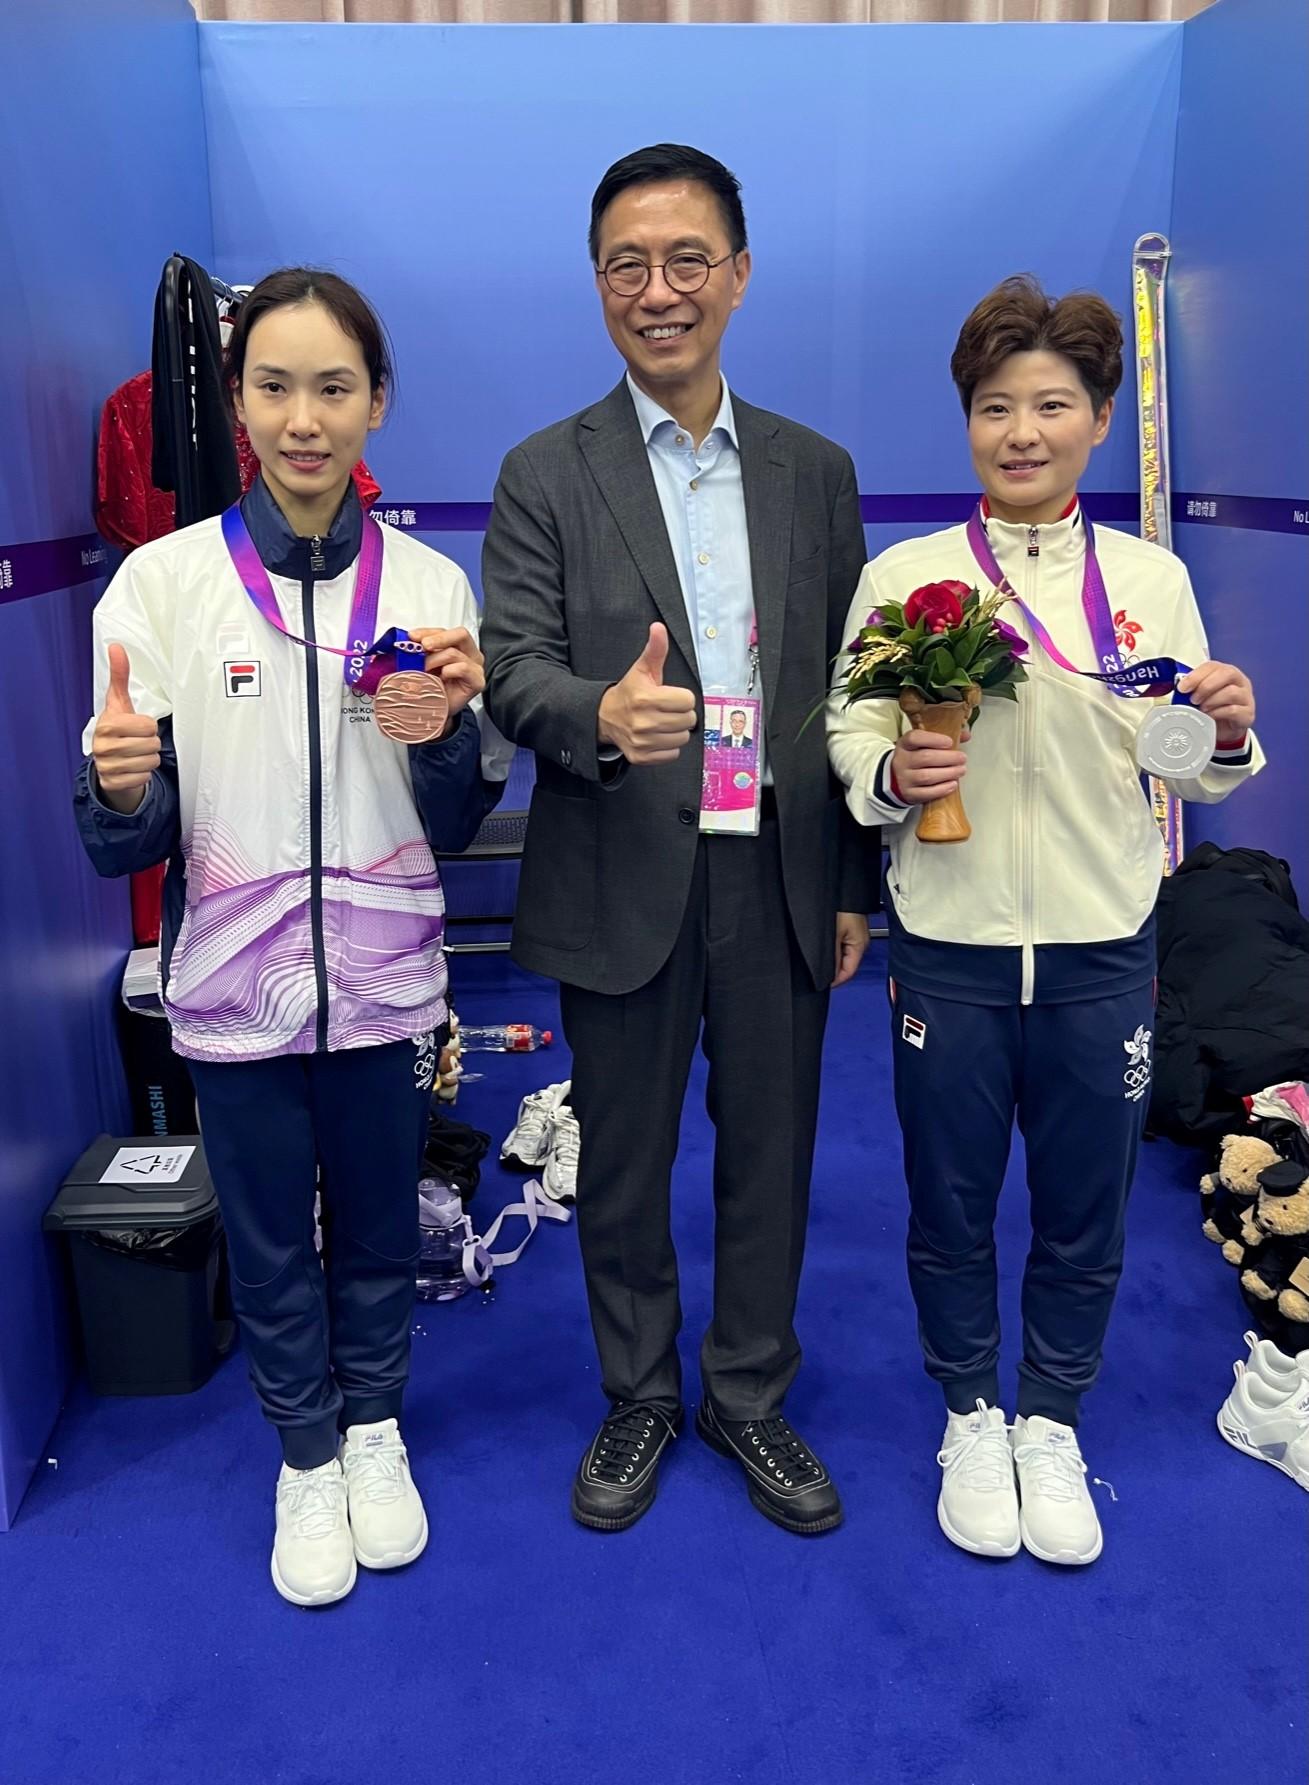 The Secretary for Culture, Sports and Tourism, Mr Kevin Yeung (centre), today (September 25) congratulated Hong Kong Wushu athletes Chen Suijin (left) and Liu Xuxu (right), on winning medals at the 19th Asian Games Hangzhou. 